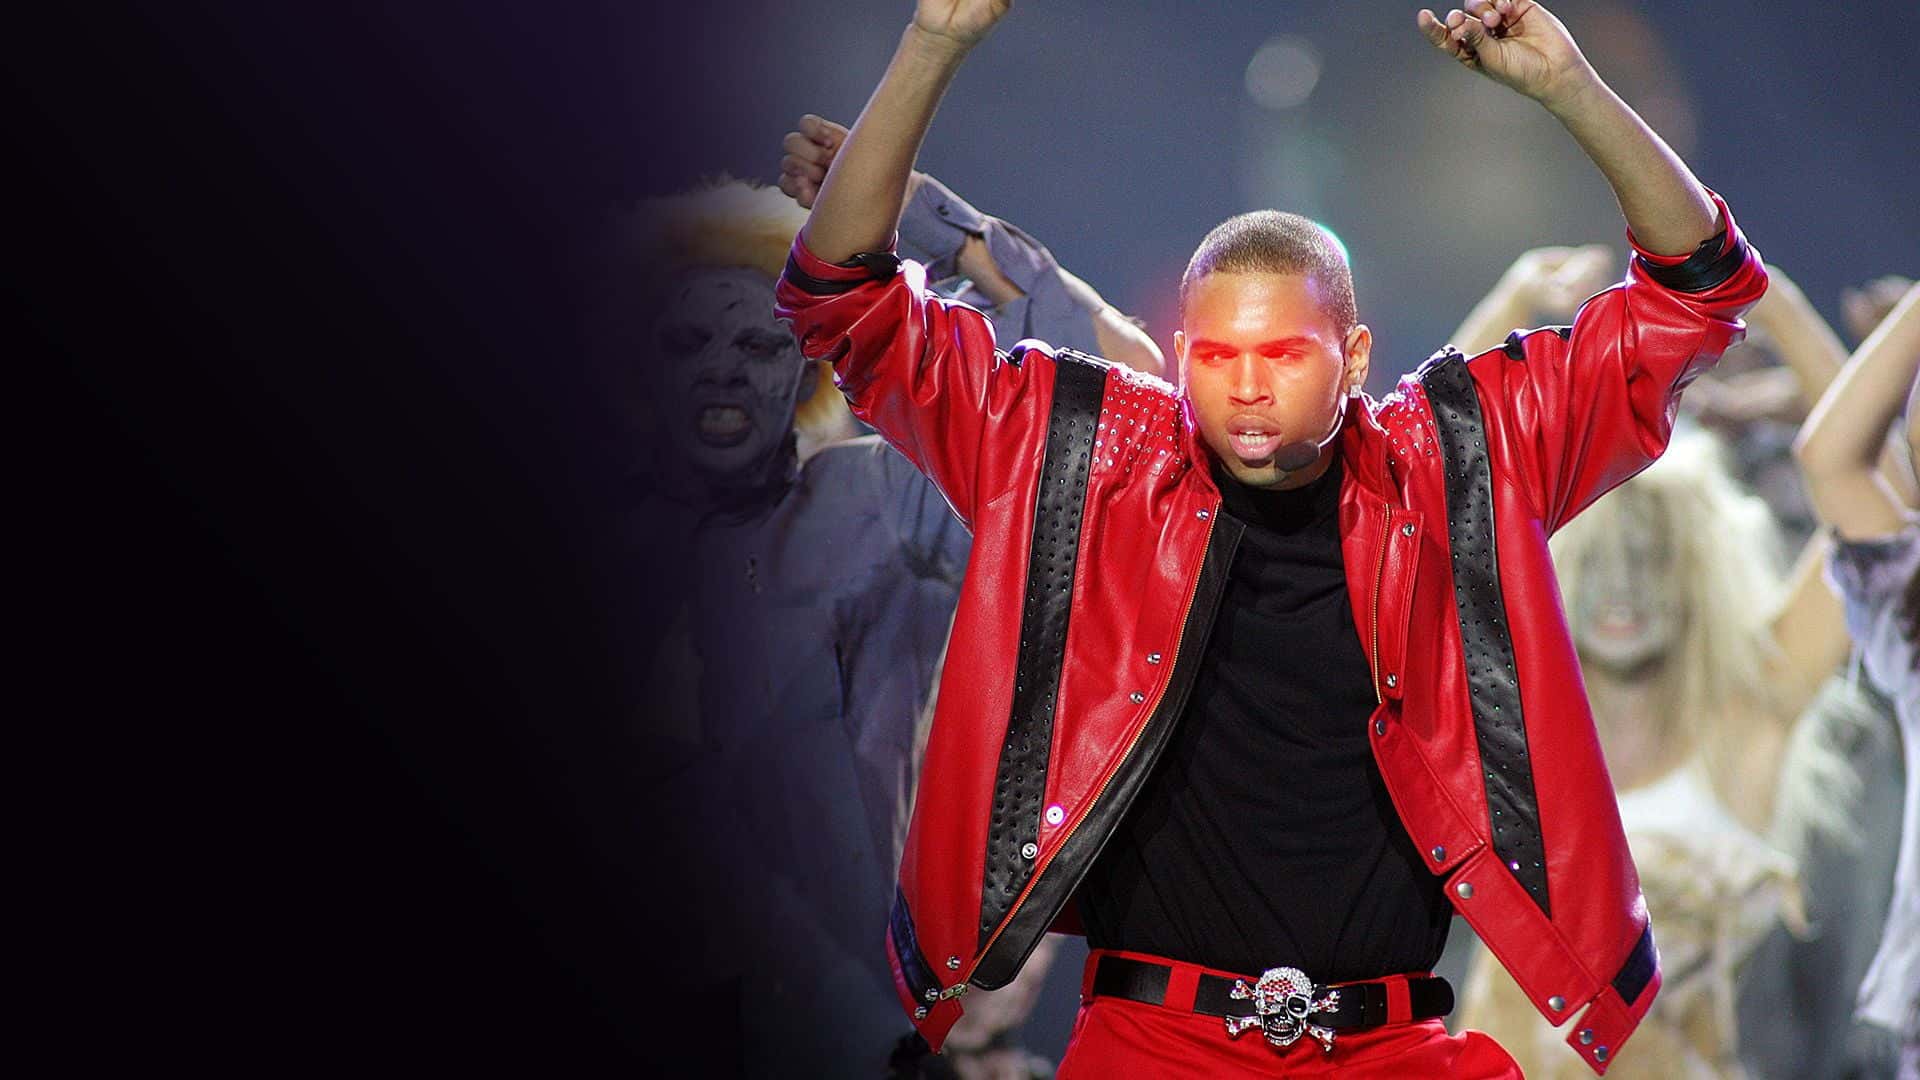 Chris Brown Delivers The Ultimate Michael Jackson “Thriller” Tribute ceek.com